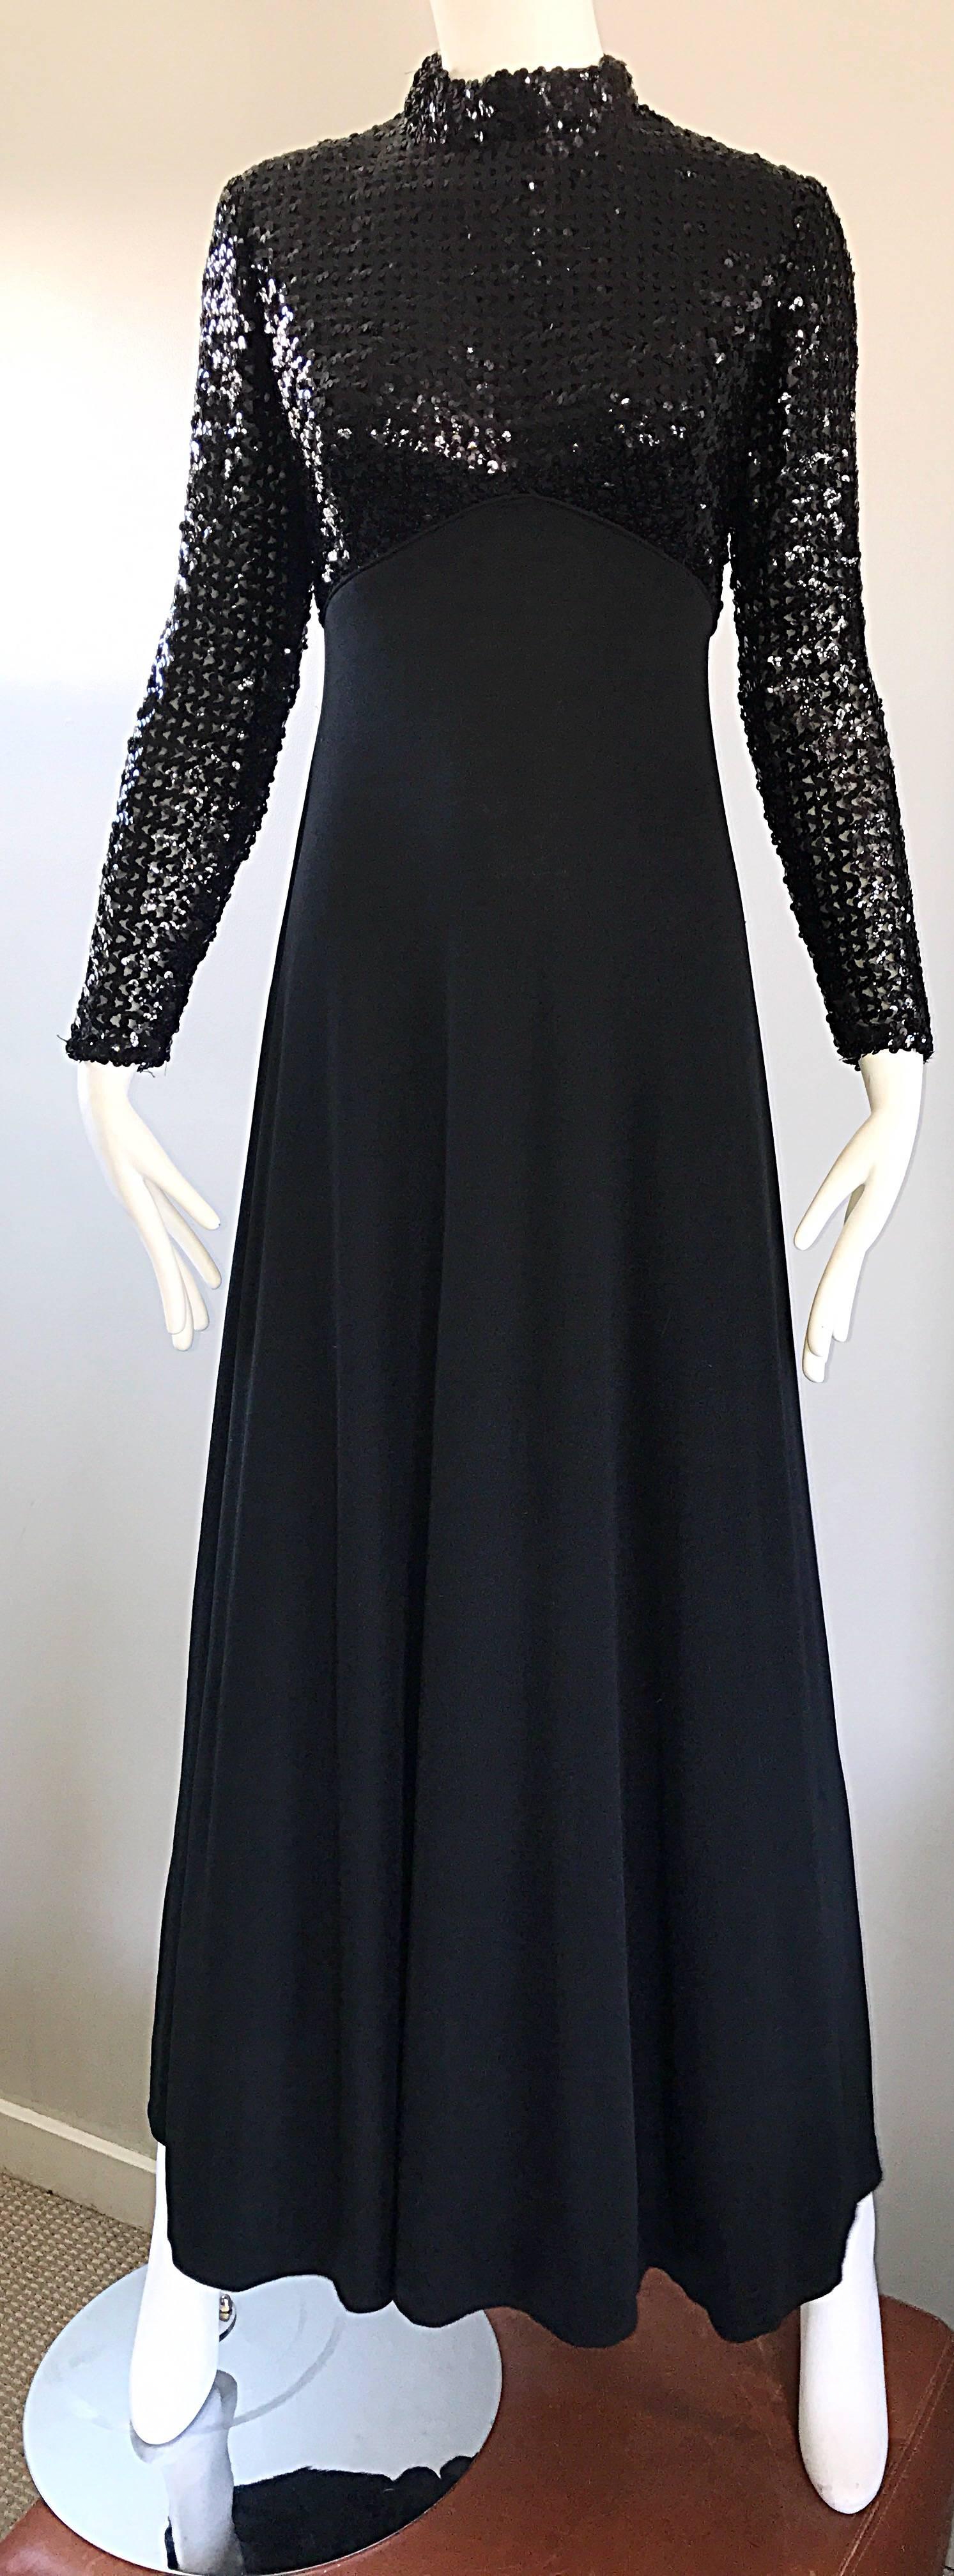 Amazing 1970s Black Sequin Long Sleeve High Neck Vintage 70s Jersey Evening Gown 5